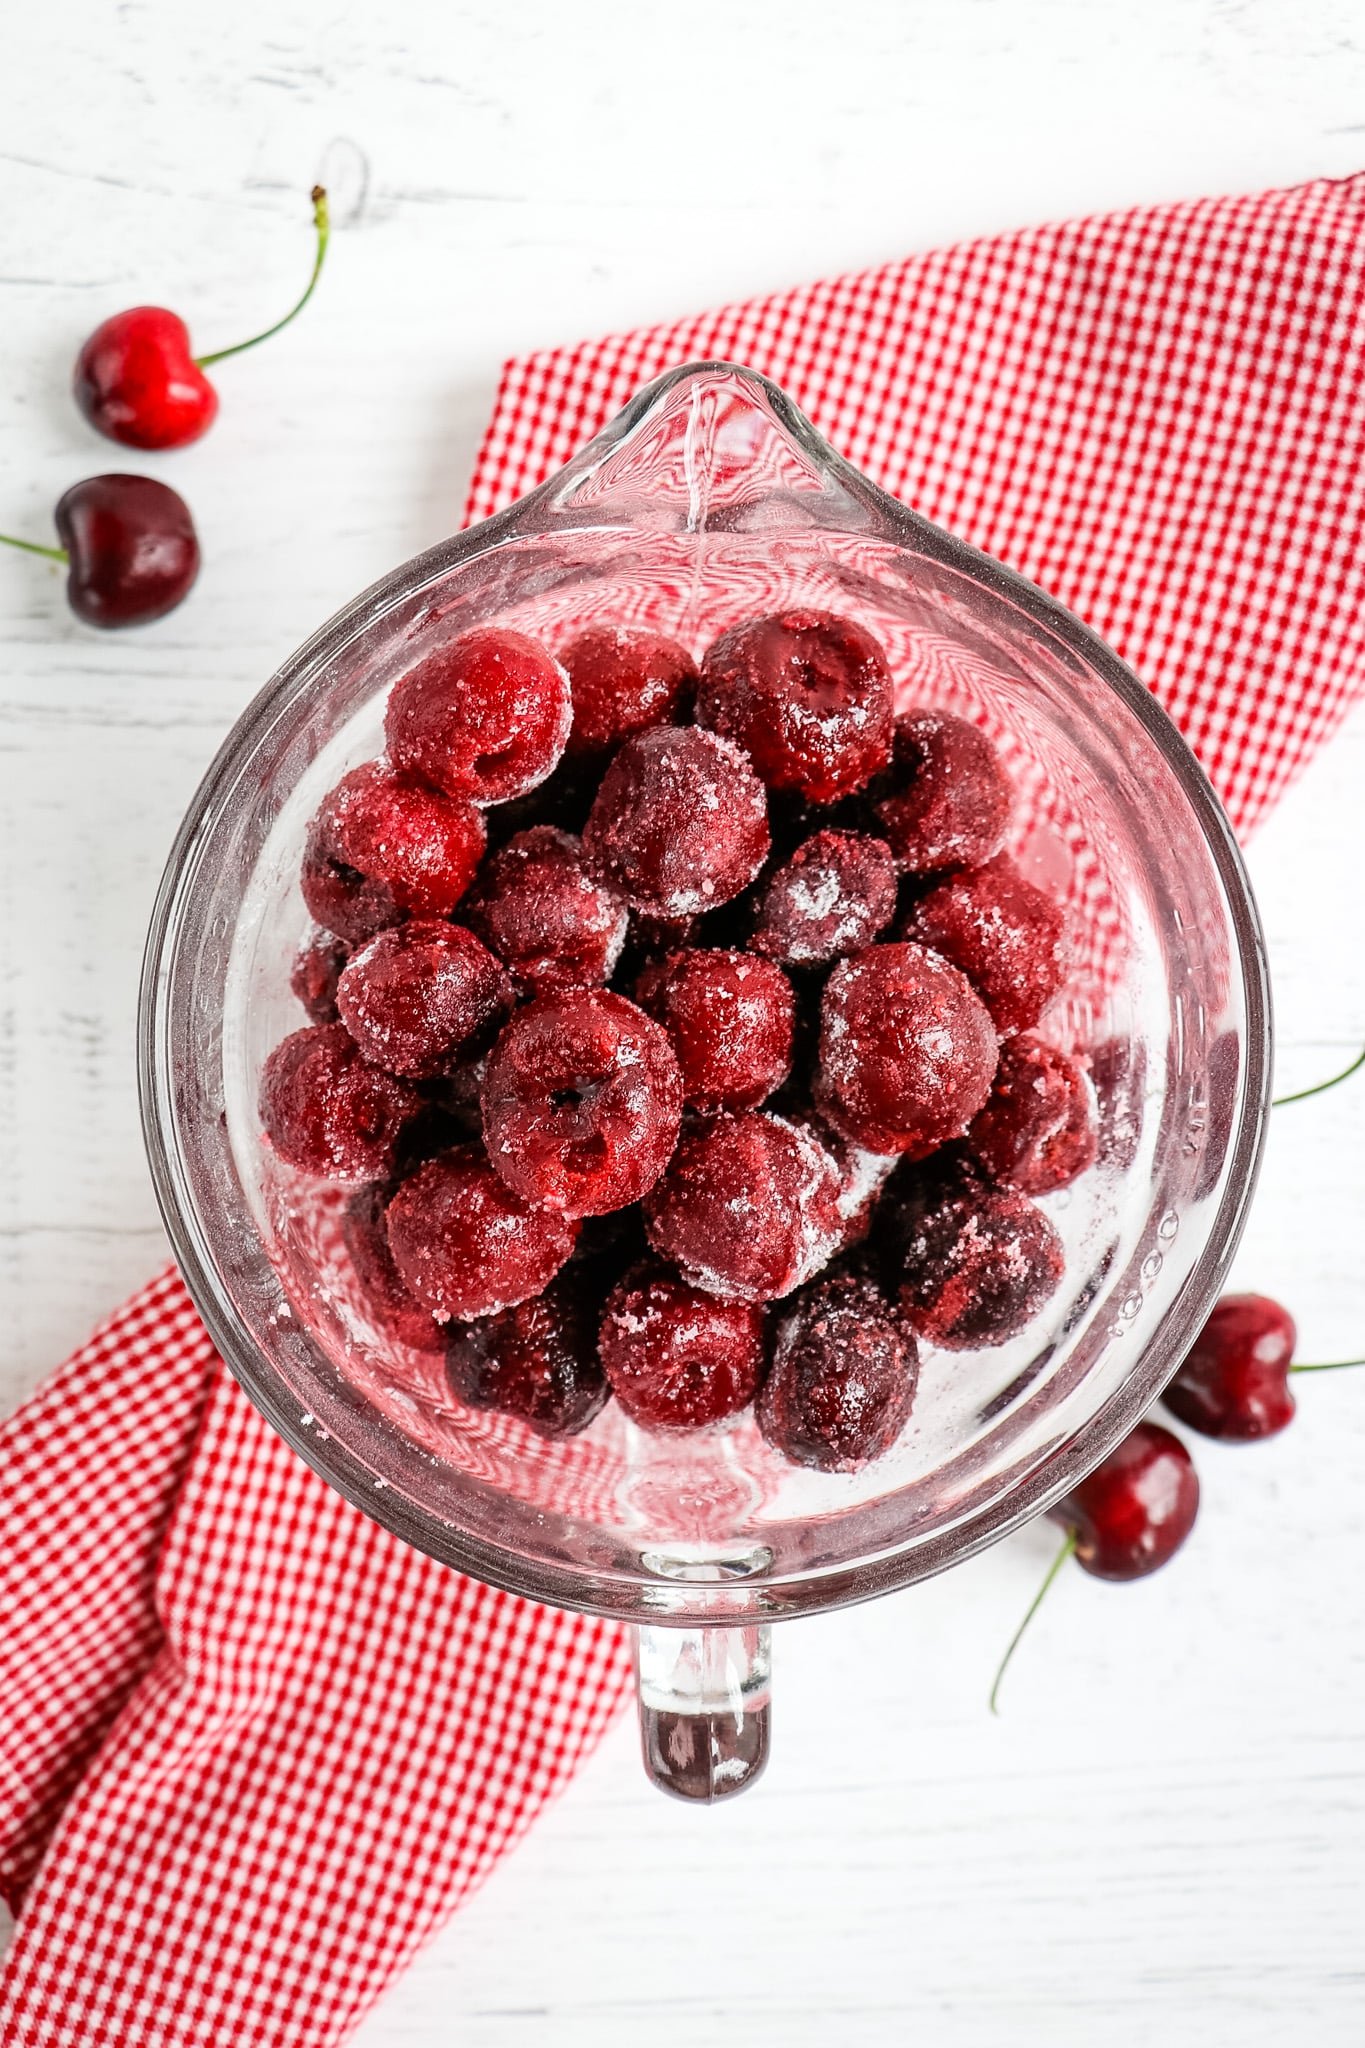 Cherries in bowl, coated with sugar.